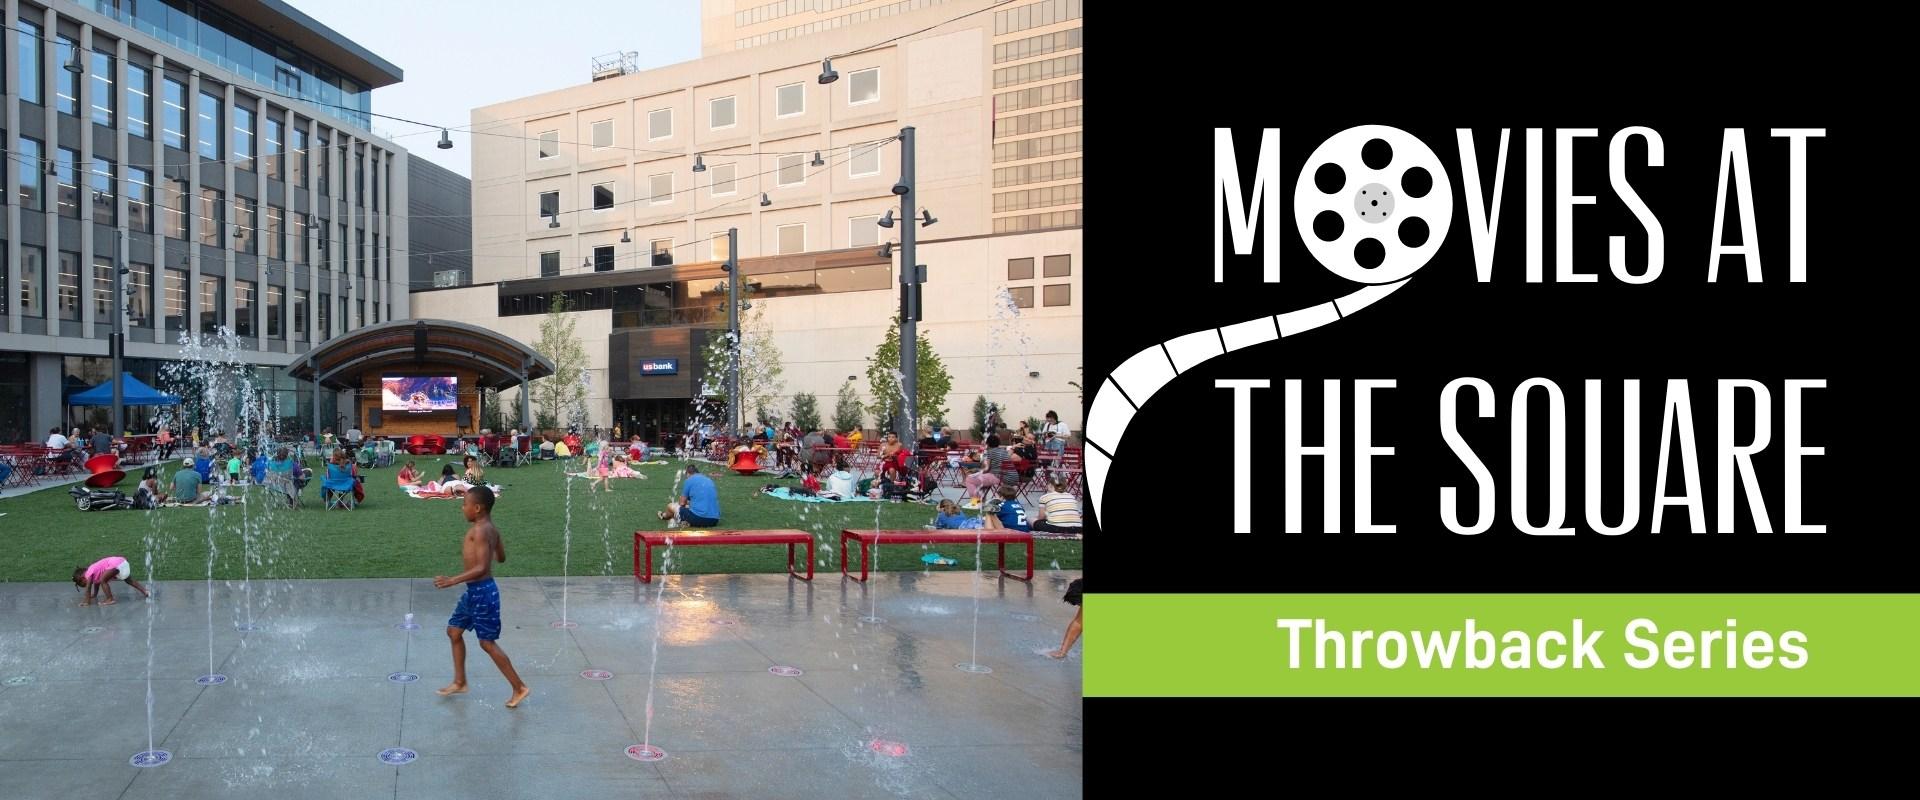 This Graphic shows people enjoying movies at the square and shows the movies at the square logo and throwback series